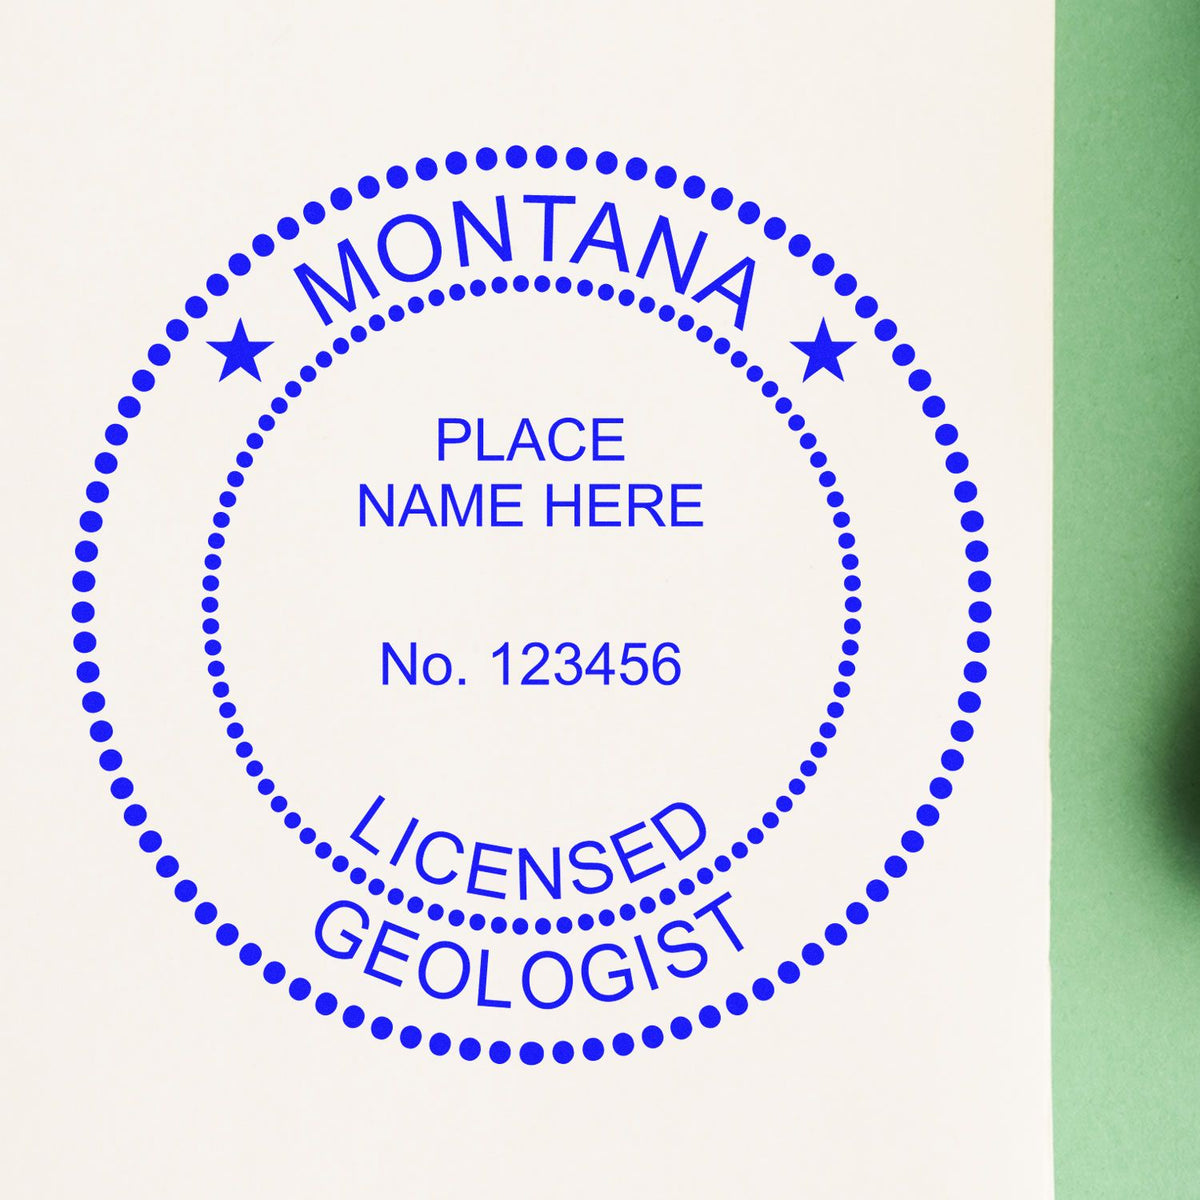 An alternative view of the Montana Professional Geologist Seal Stamp stamped on a sheet of paper showing the image in use